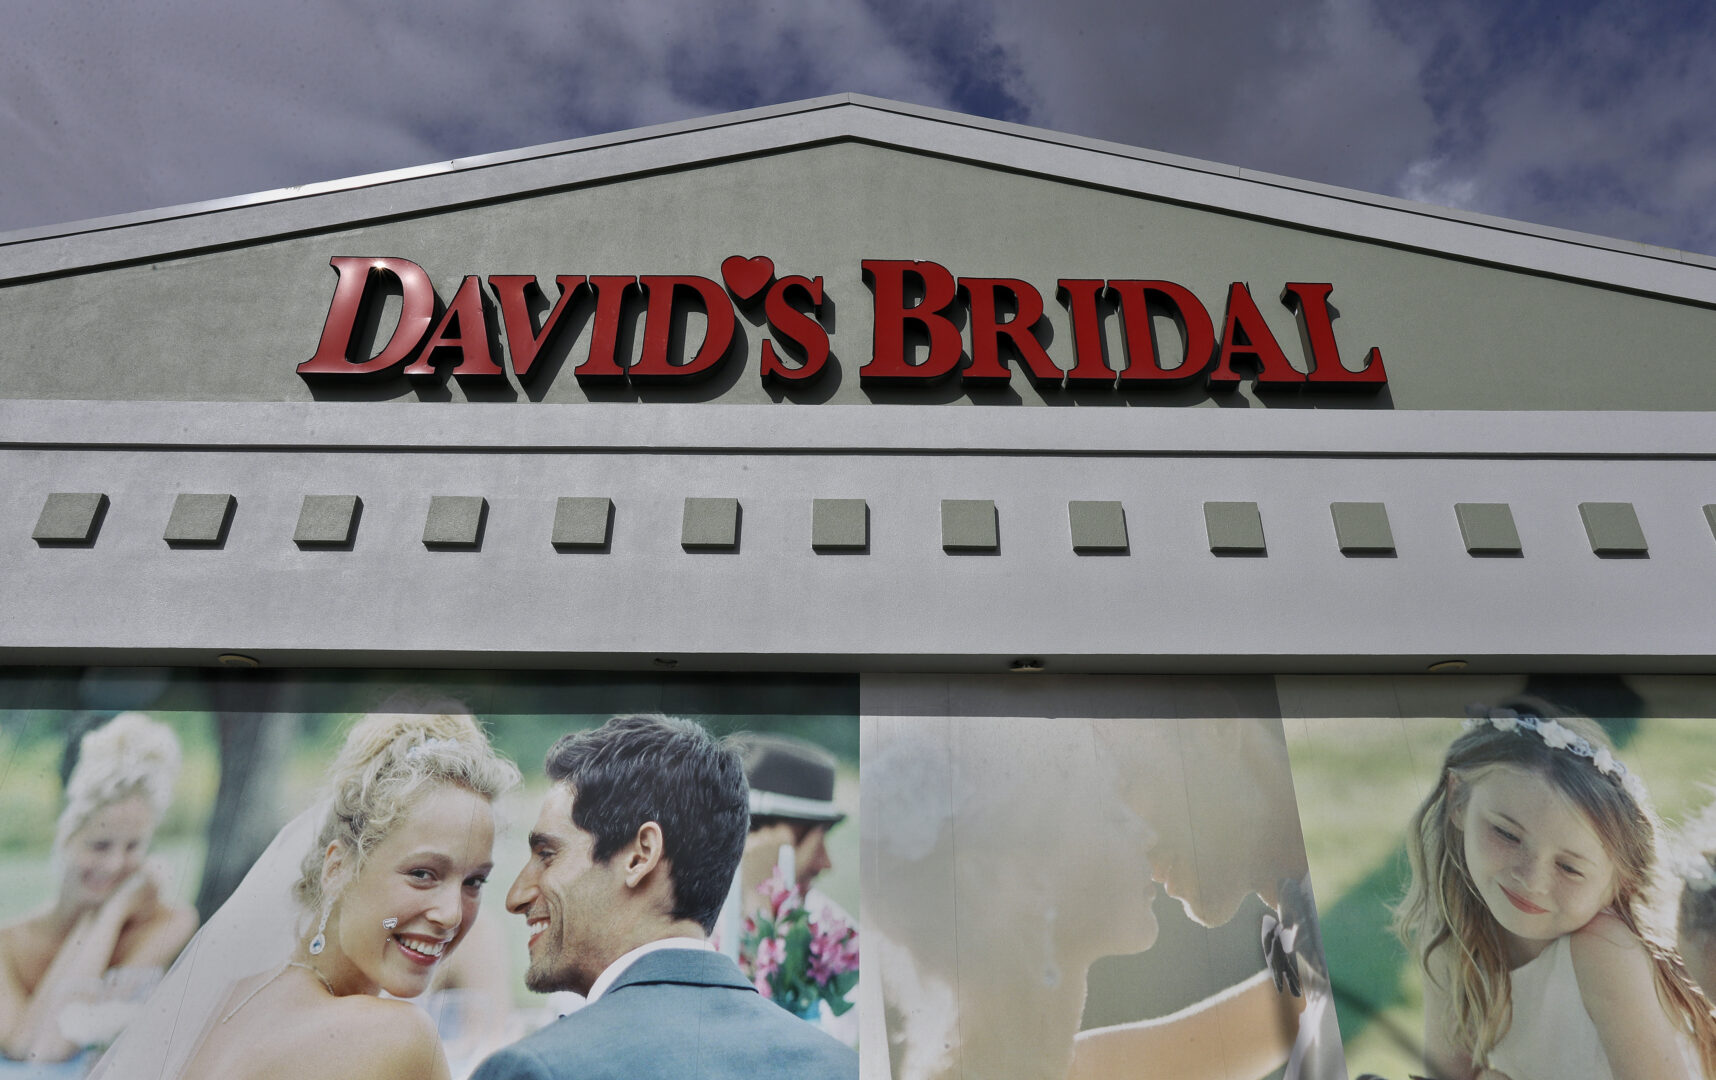 FILE - The David's Bridal shop is shown Nov. 19, 2018, in Tampa, Fla. David’s Bridal filed for bankruptcy protection Monday, April 17, 2023 the second time that the firm has sought such protection in the last five years. The announcement came just days after the company, one of the largest sellers of wedding gowns and formal wear, said it could be eliminating 9,236 positions across the United States. The Conshohocken, Pennsylvania-based retailer employs more than 11,000 workers, (AP Photo/Chris O'Meara, file)